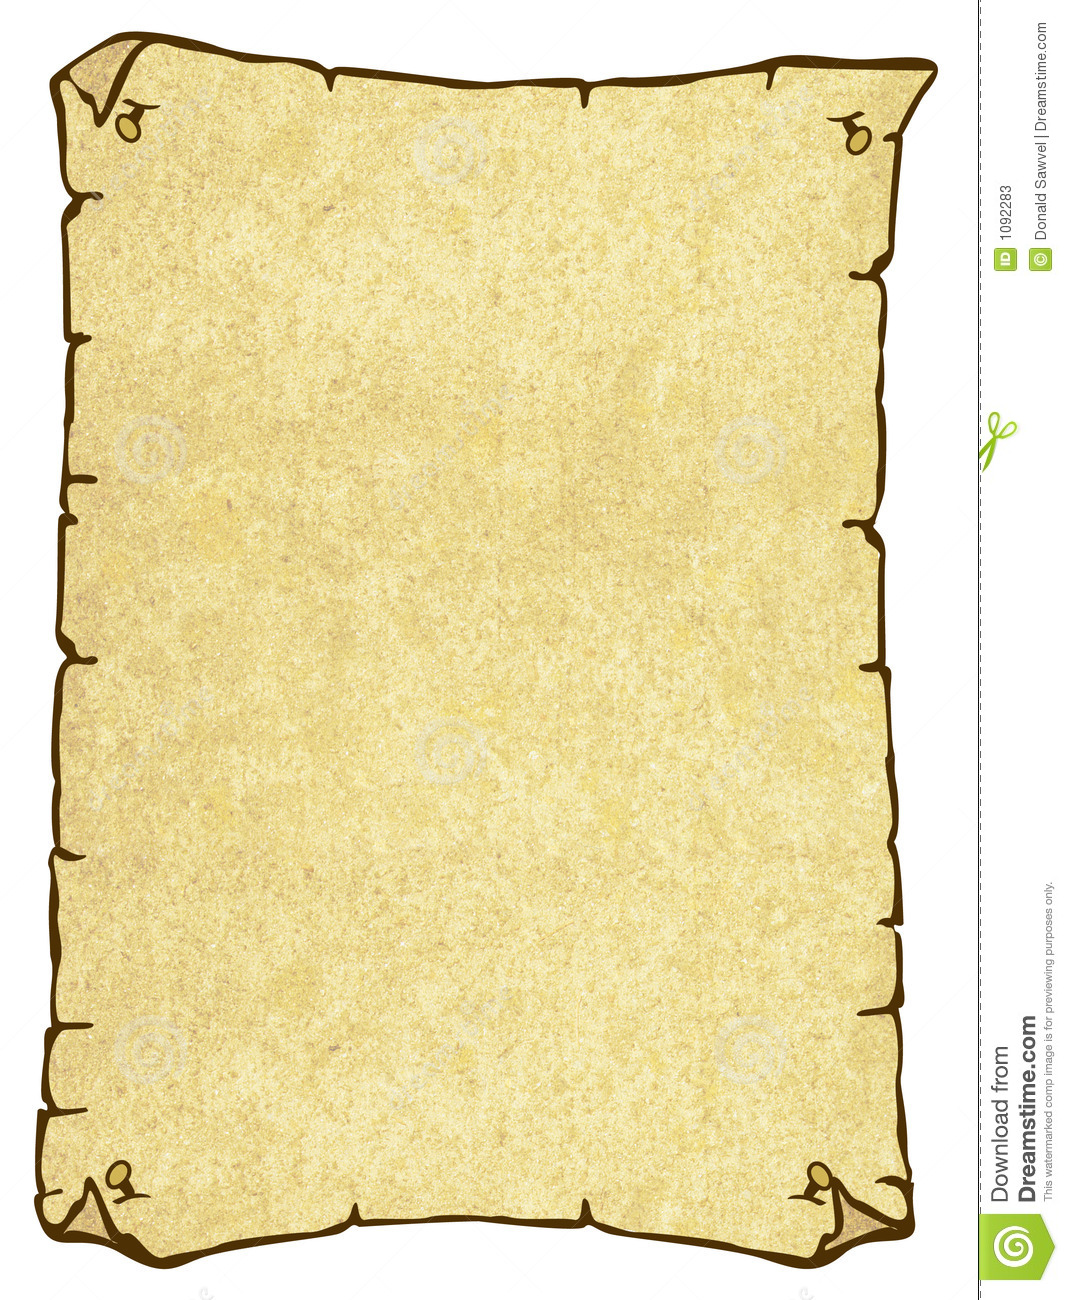 Parchment Paper In The Form Of A Wanted Poster